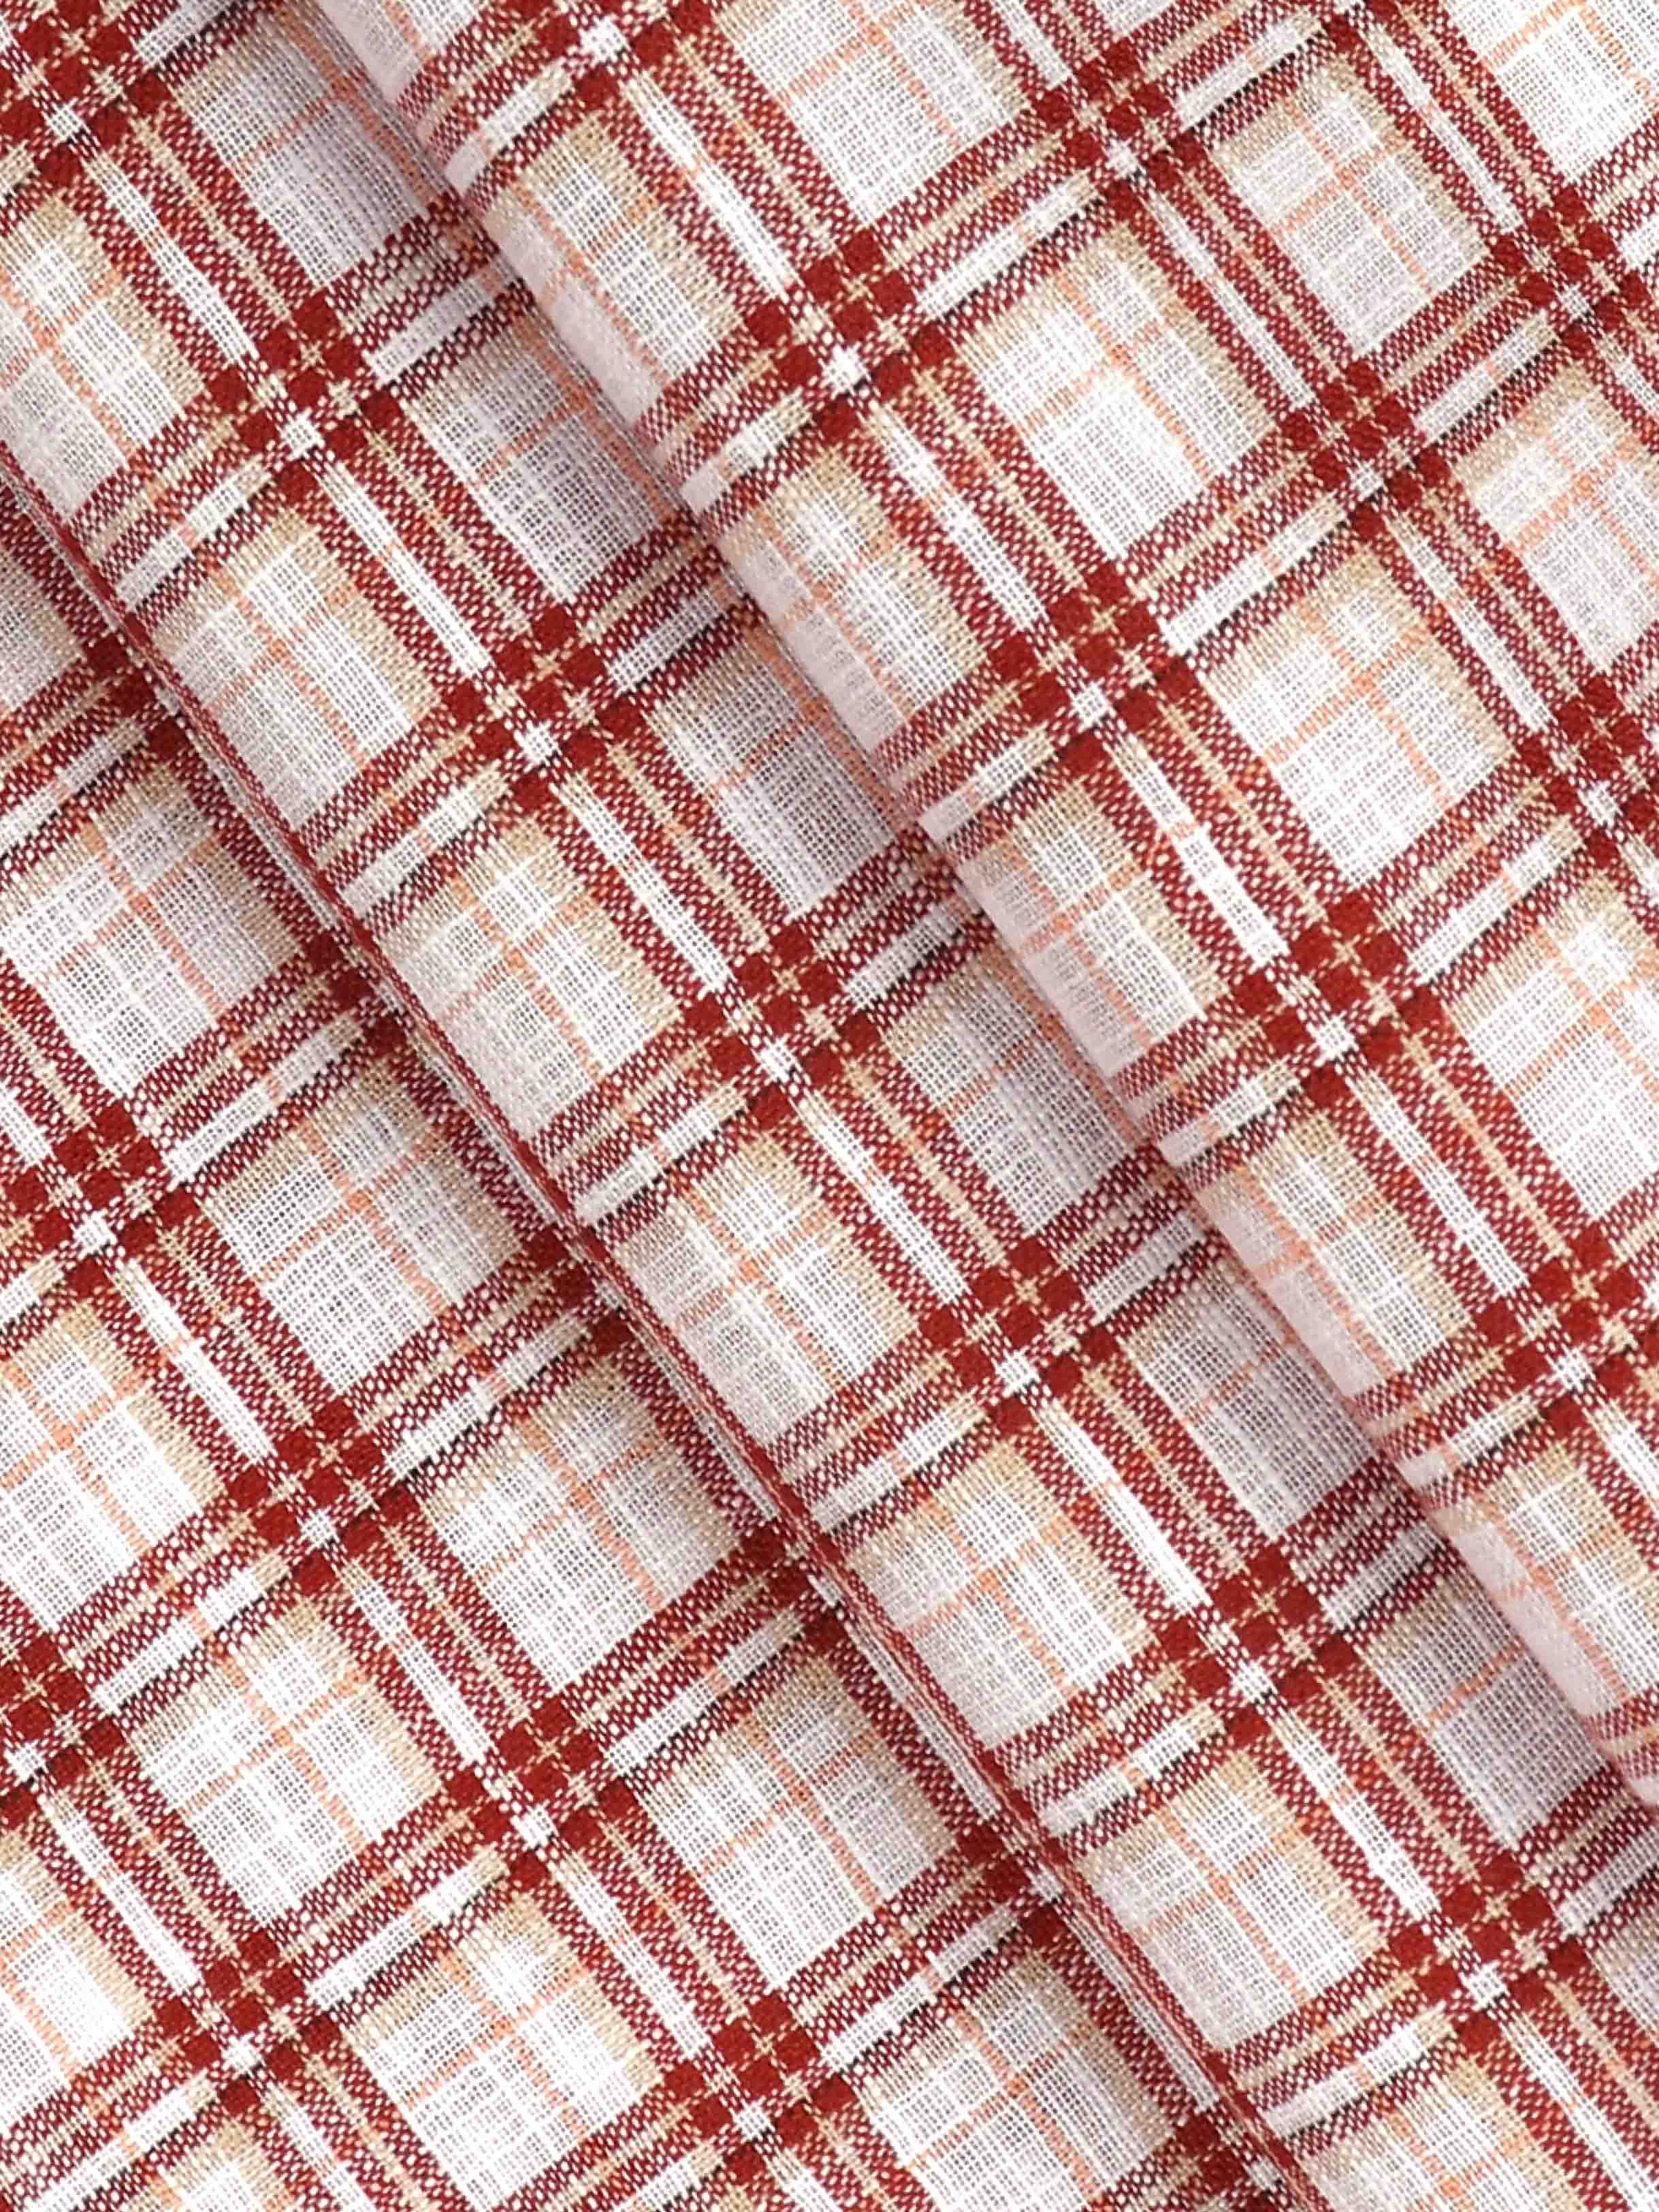 Cotton Colour Check Maroon & Sandal Shirting Fabric High Style